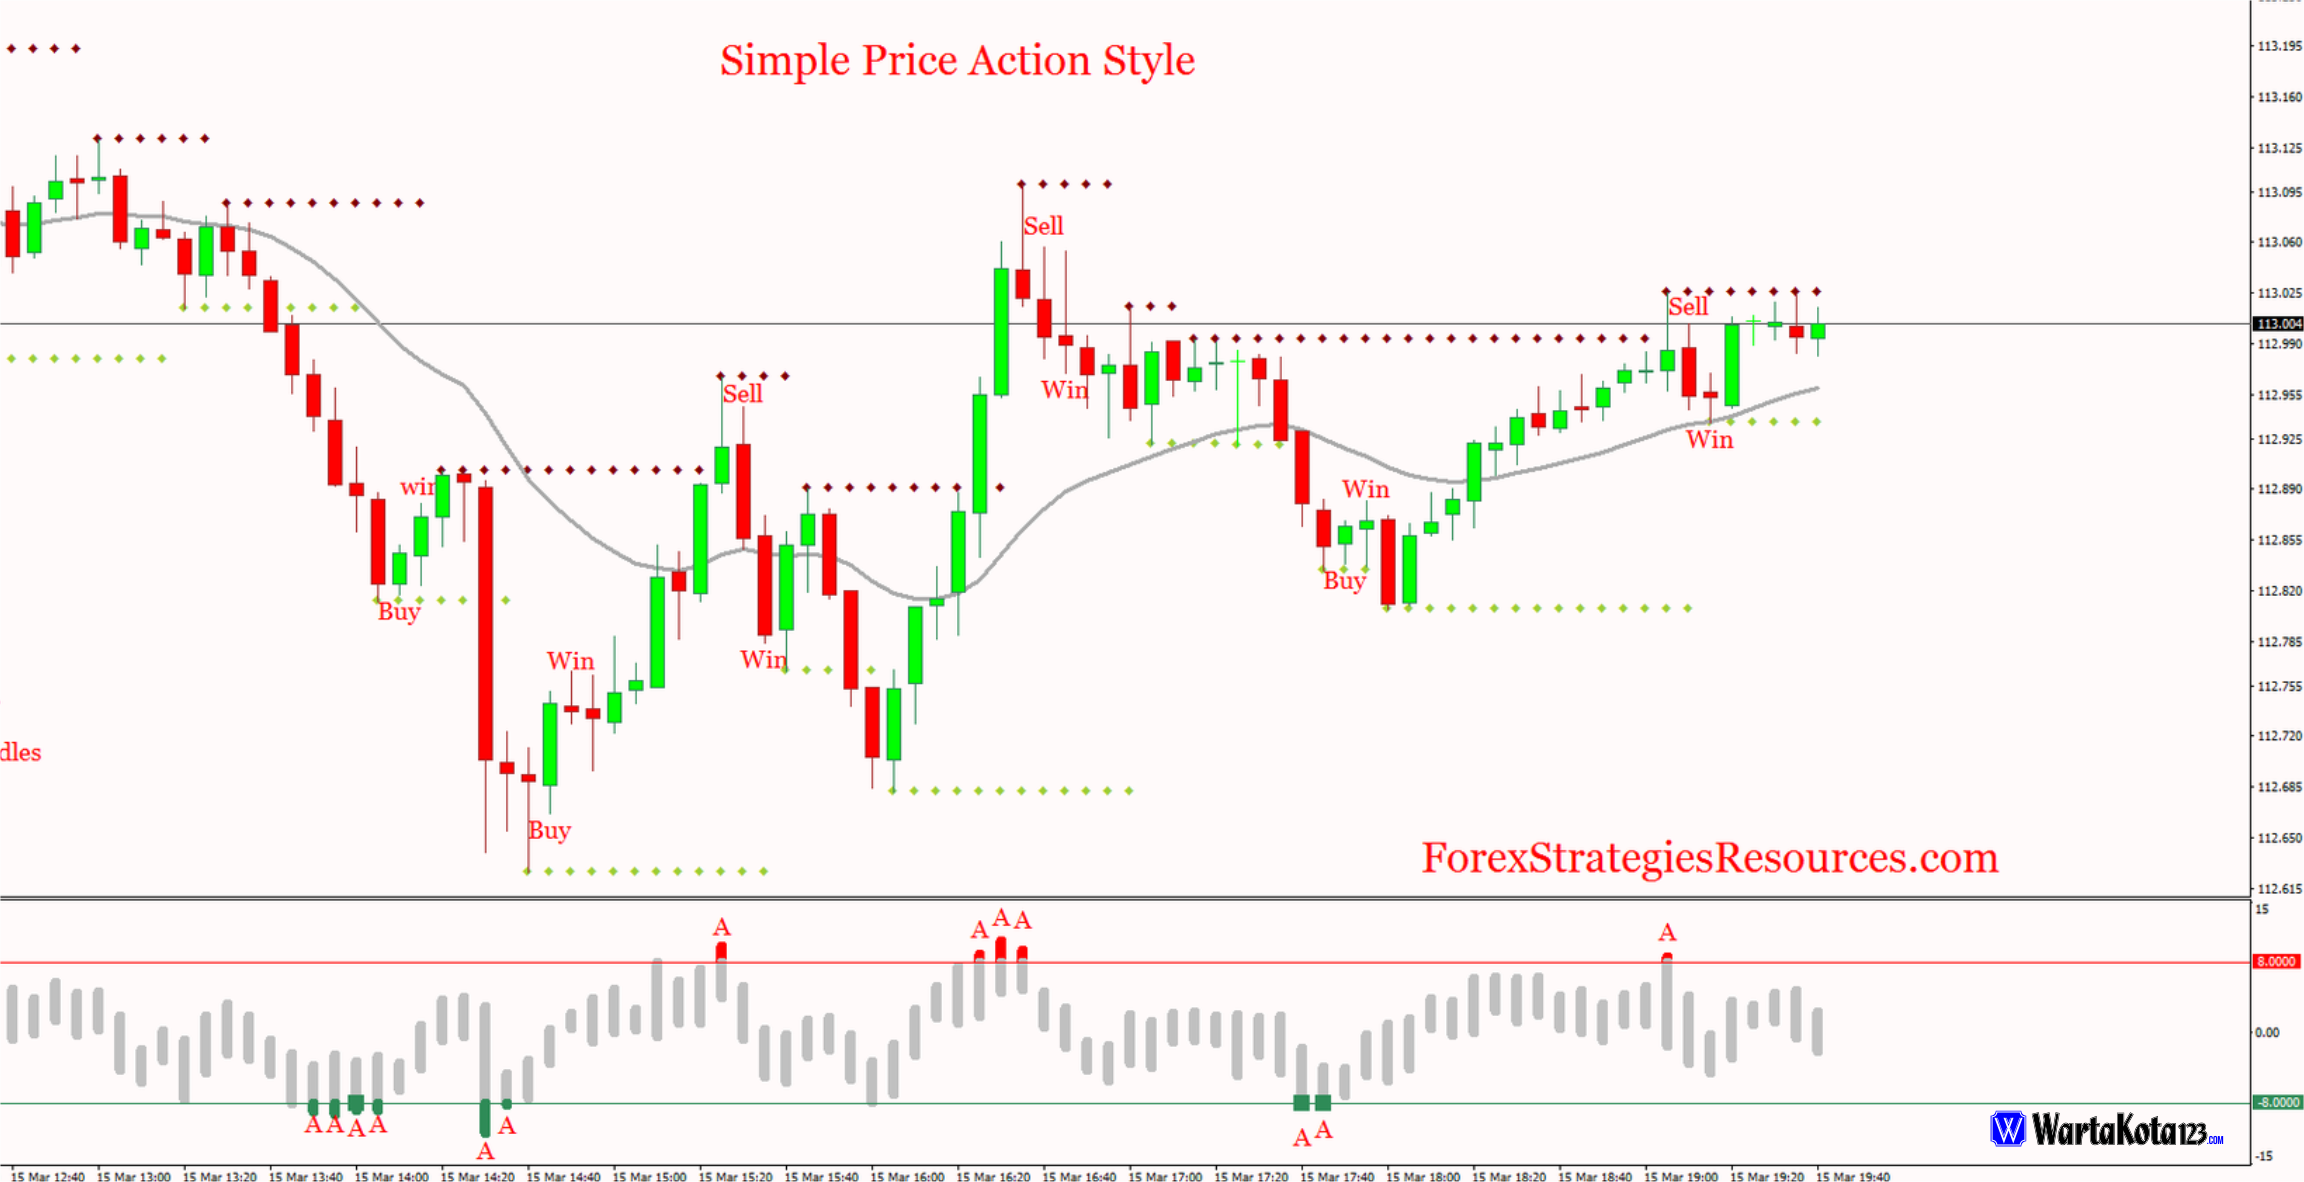 Price action strategy